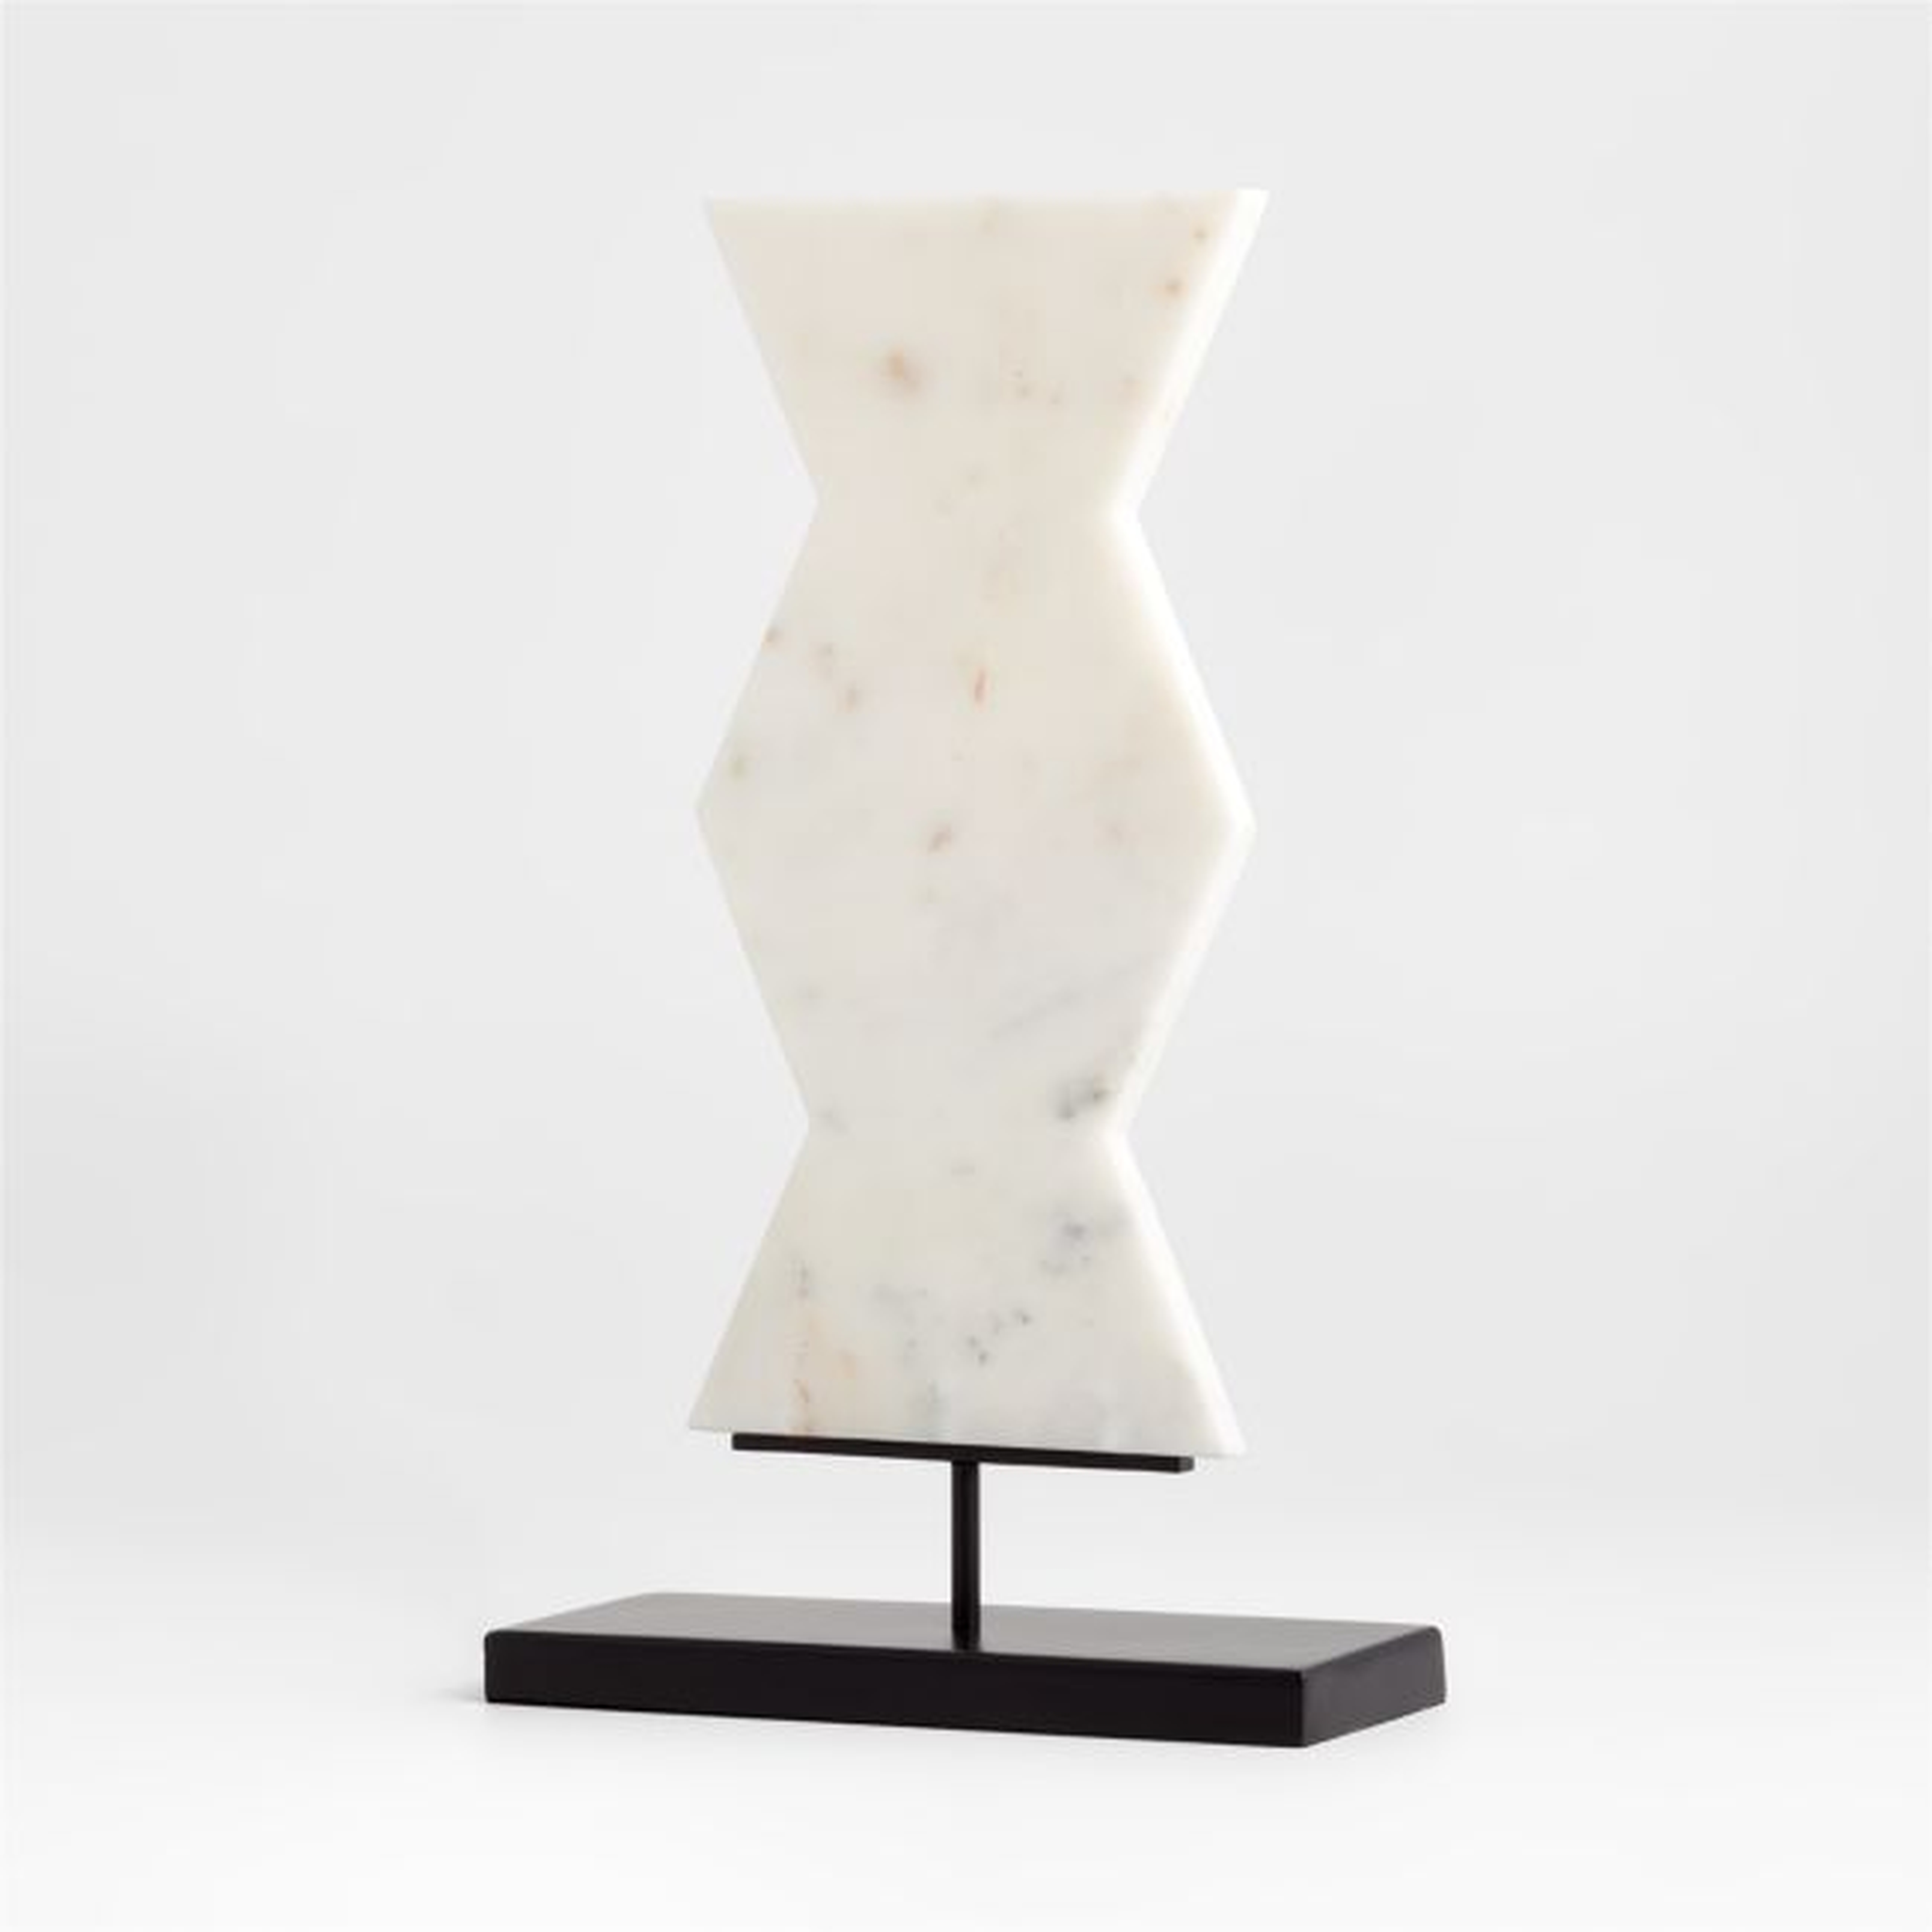 Destan Marble Sculpture on Stand 16.5" - Crate and Barrel